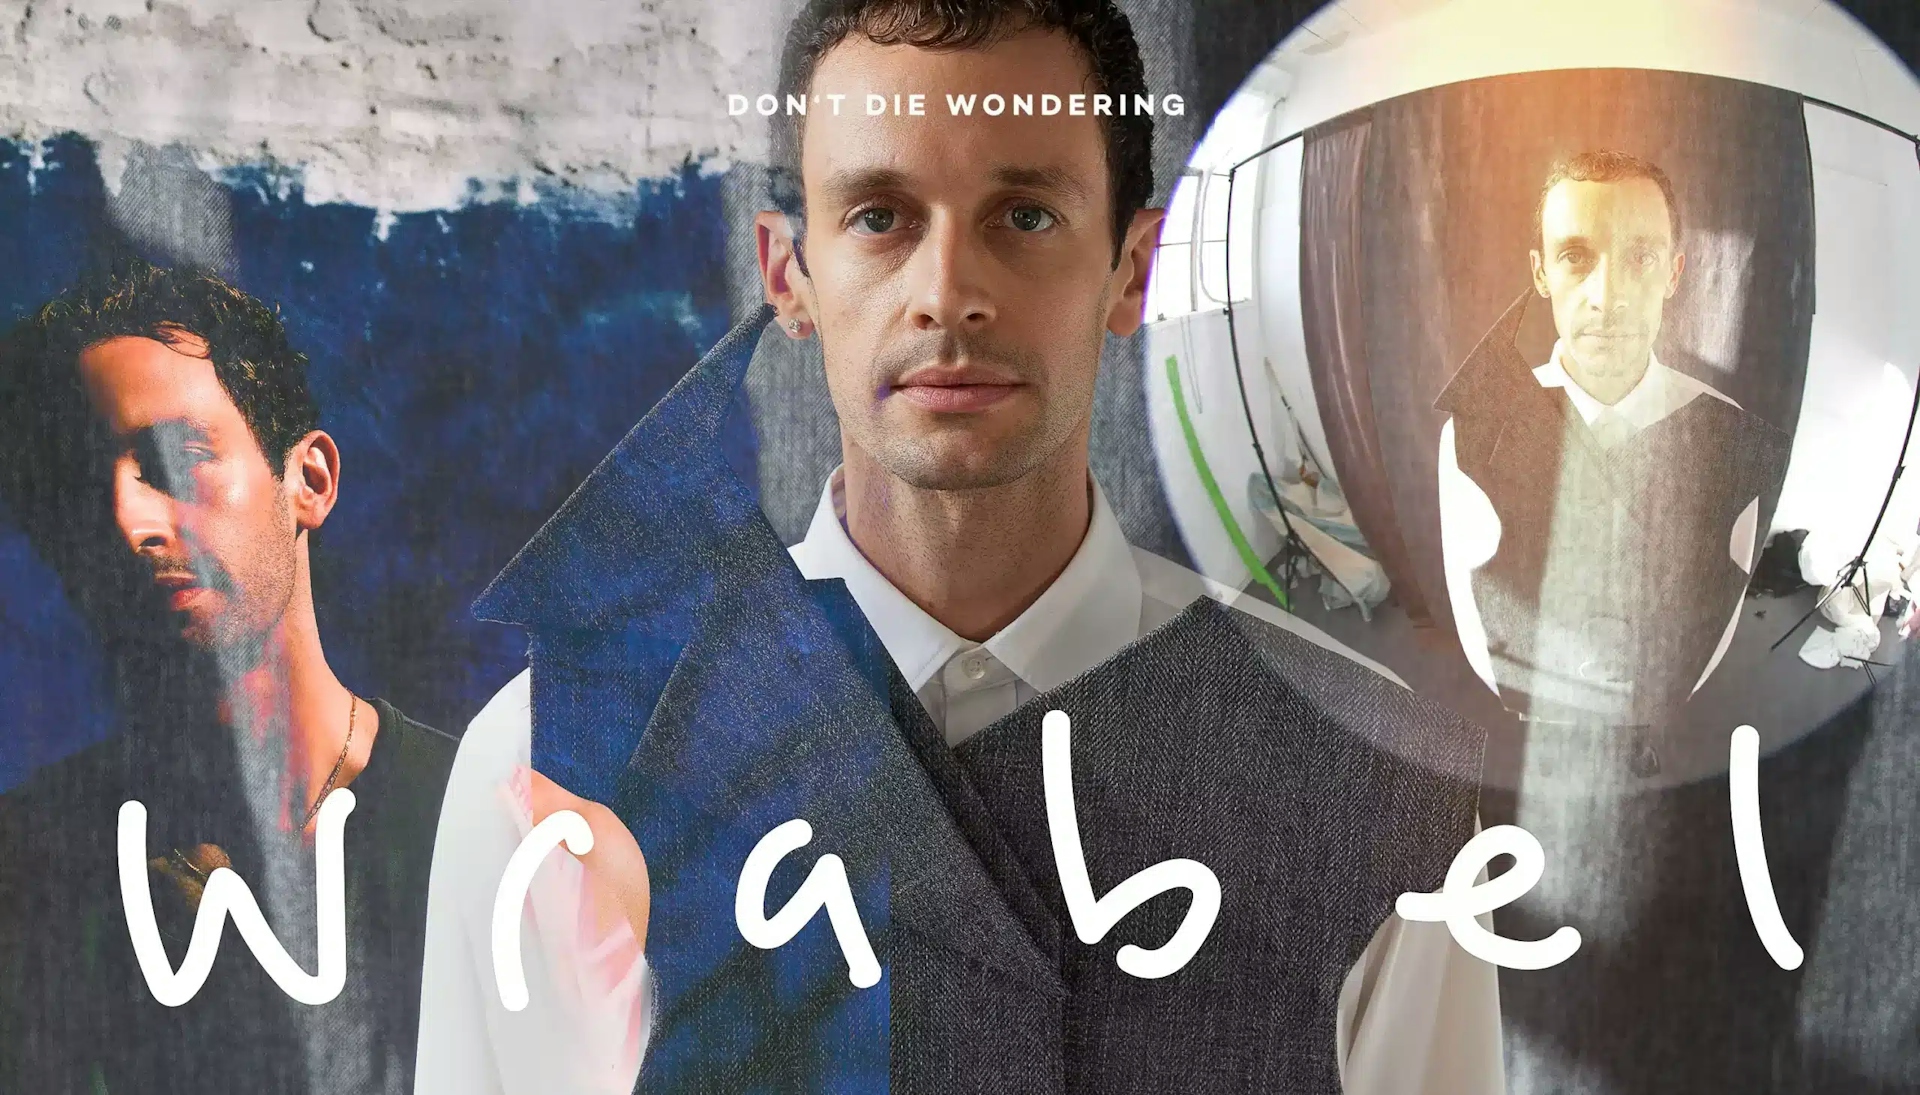 Wrabel | From ‘Abstract Art’ to Building Connections Through Music